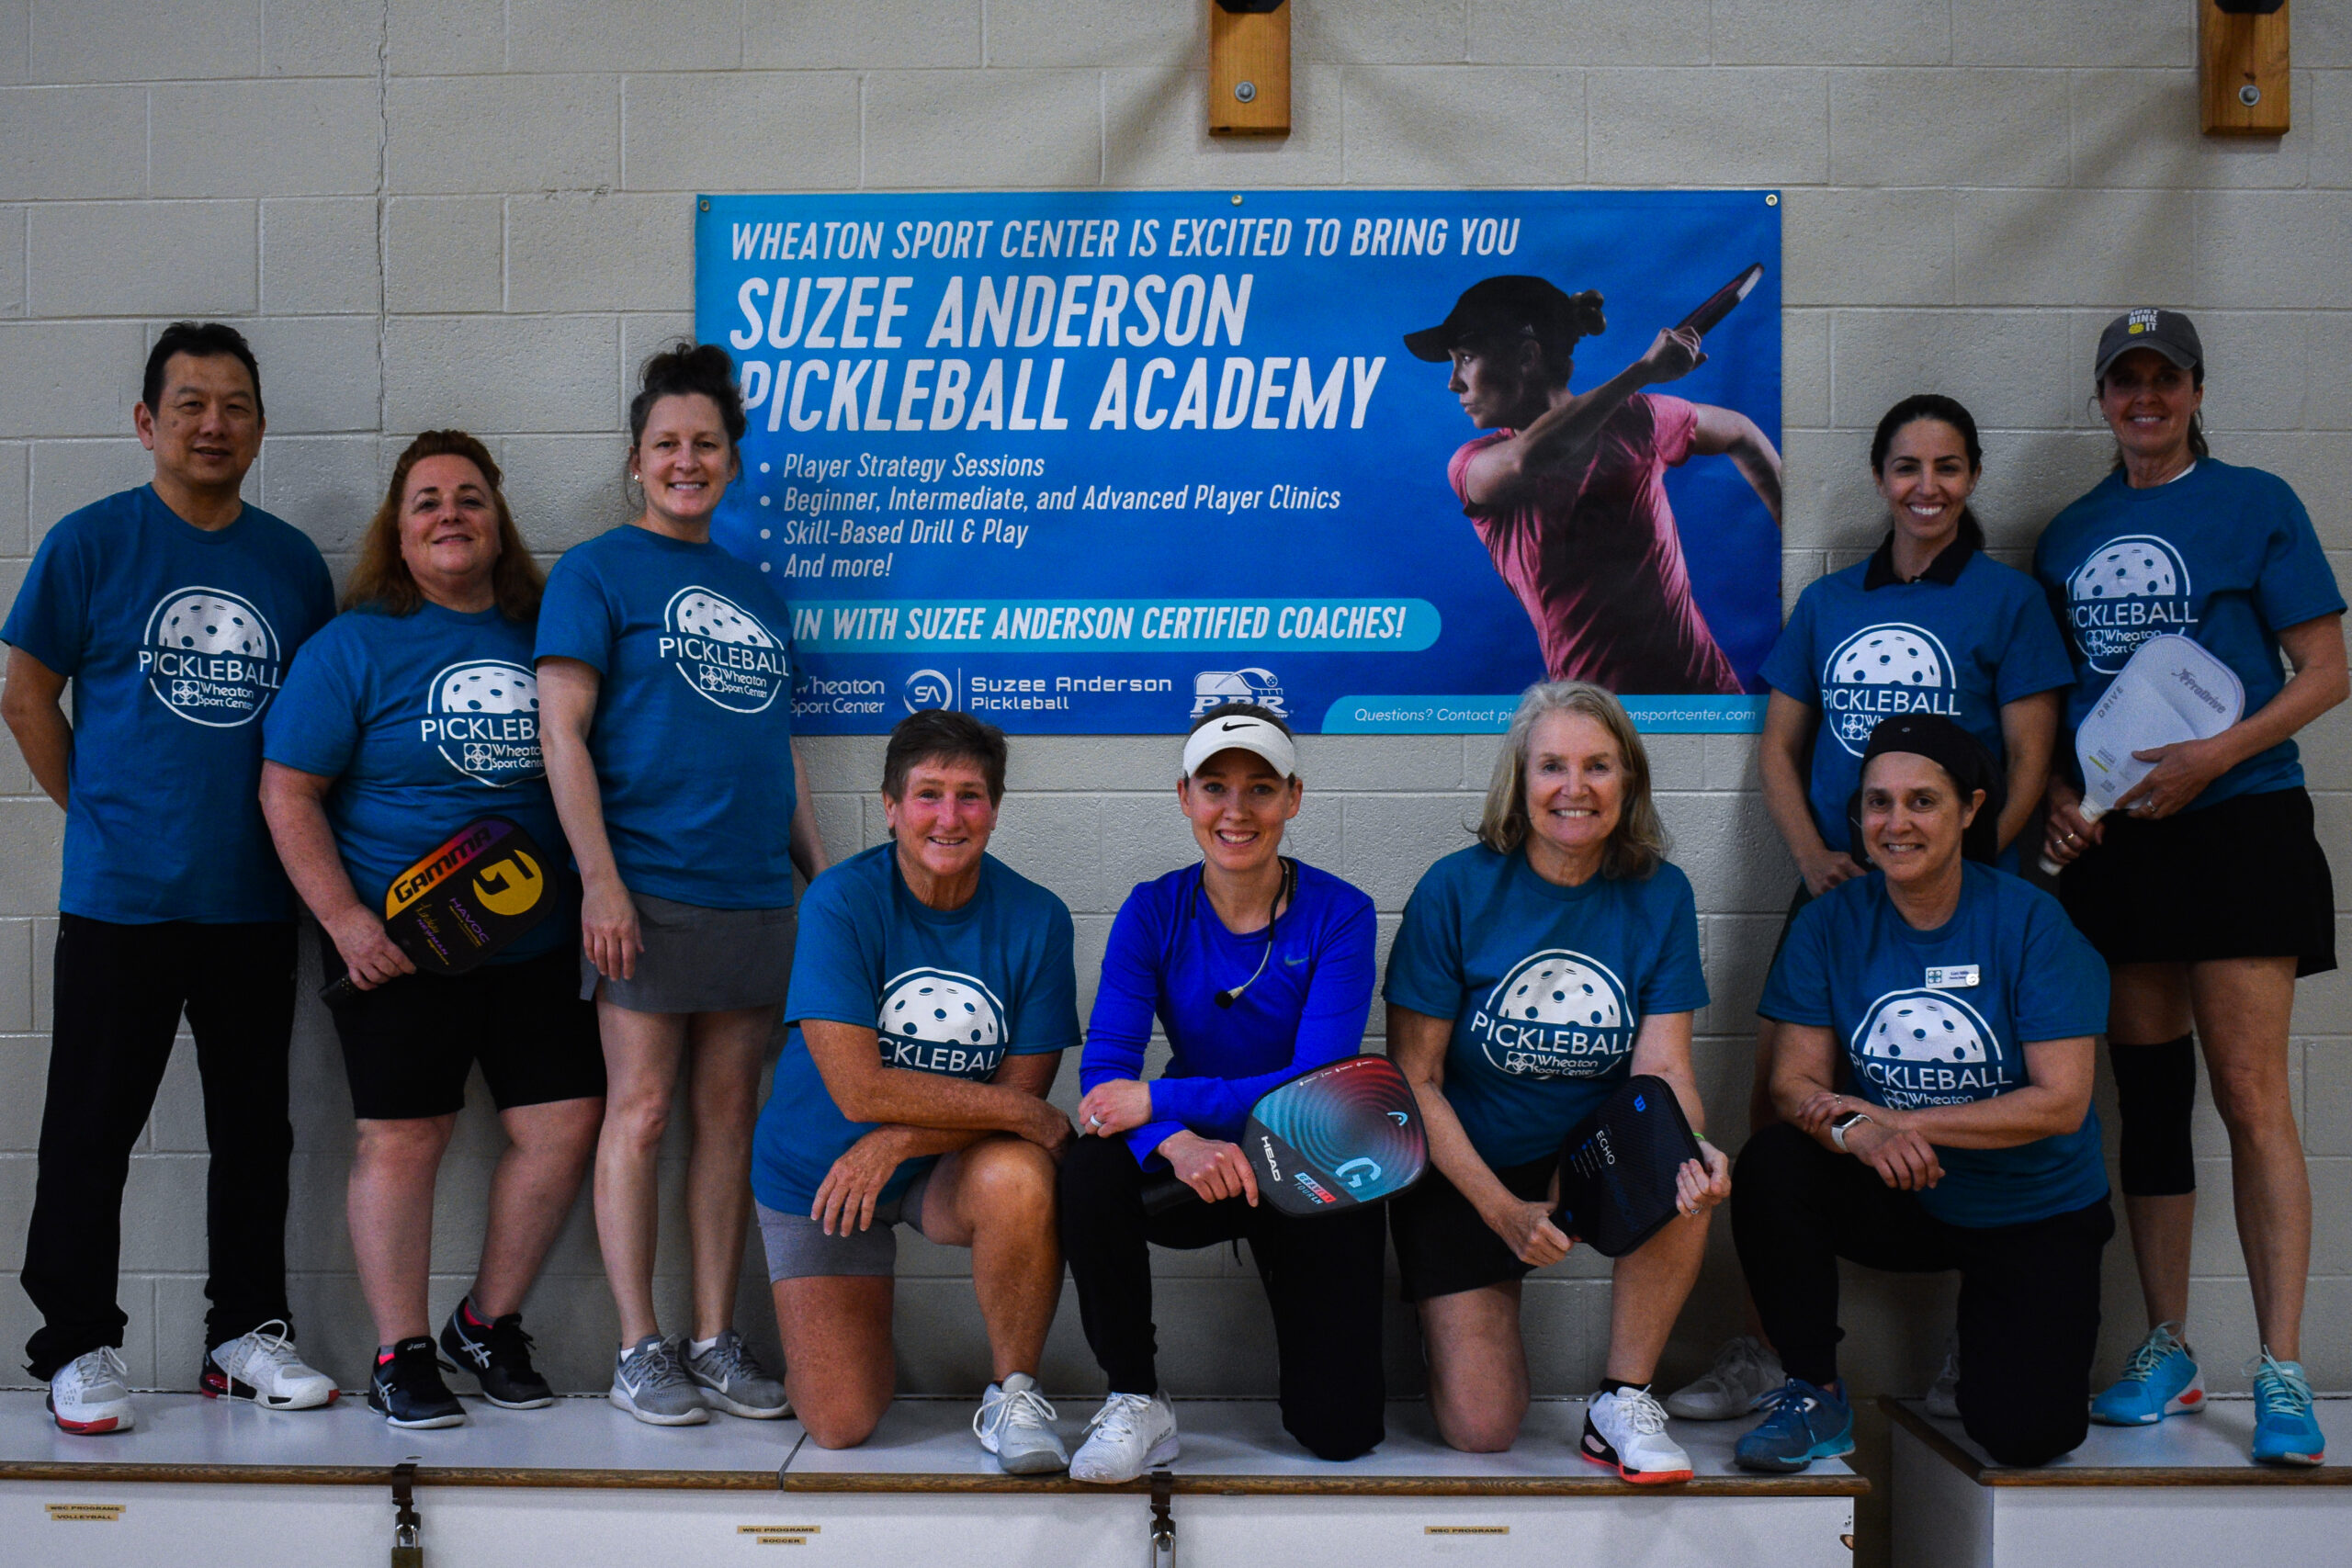 Suzee Anderson playing pickleball at Wheaton Sport Center, Rating Clinic Professionals